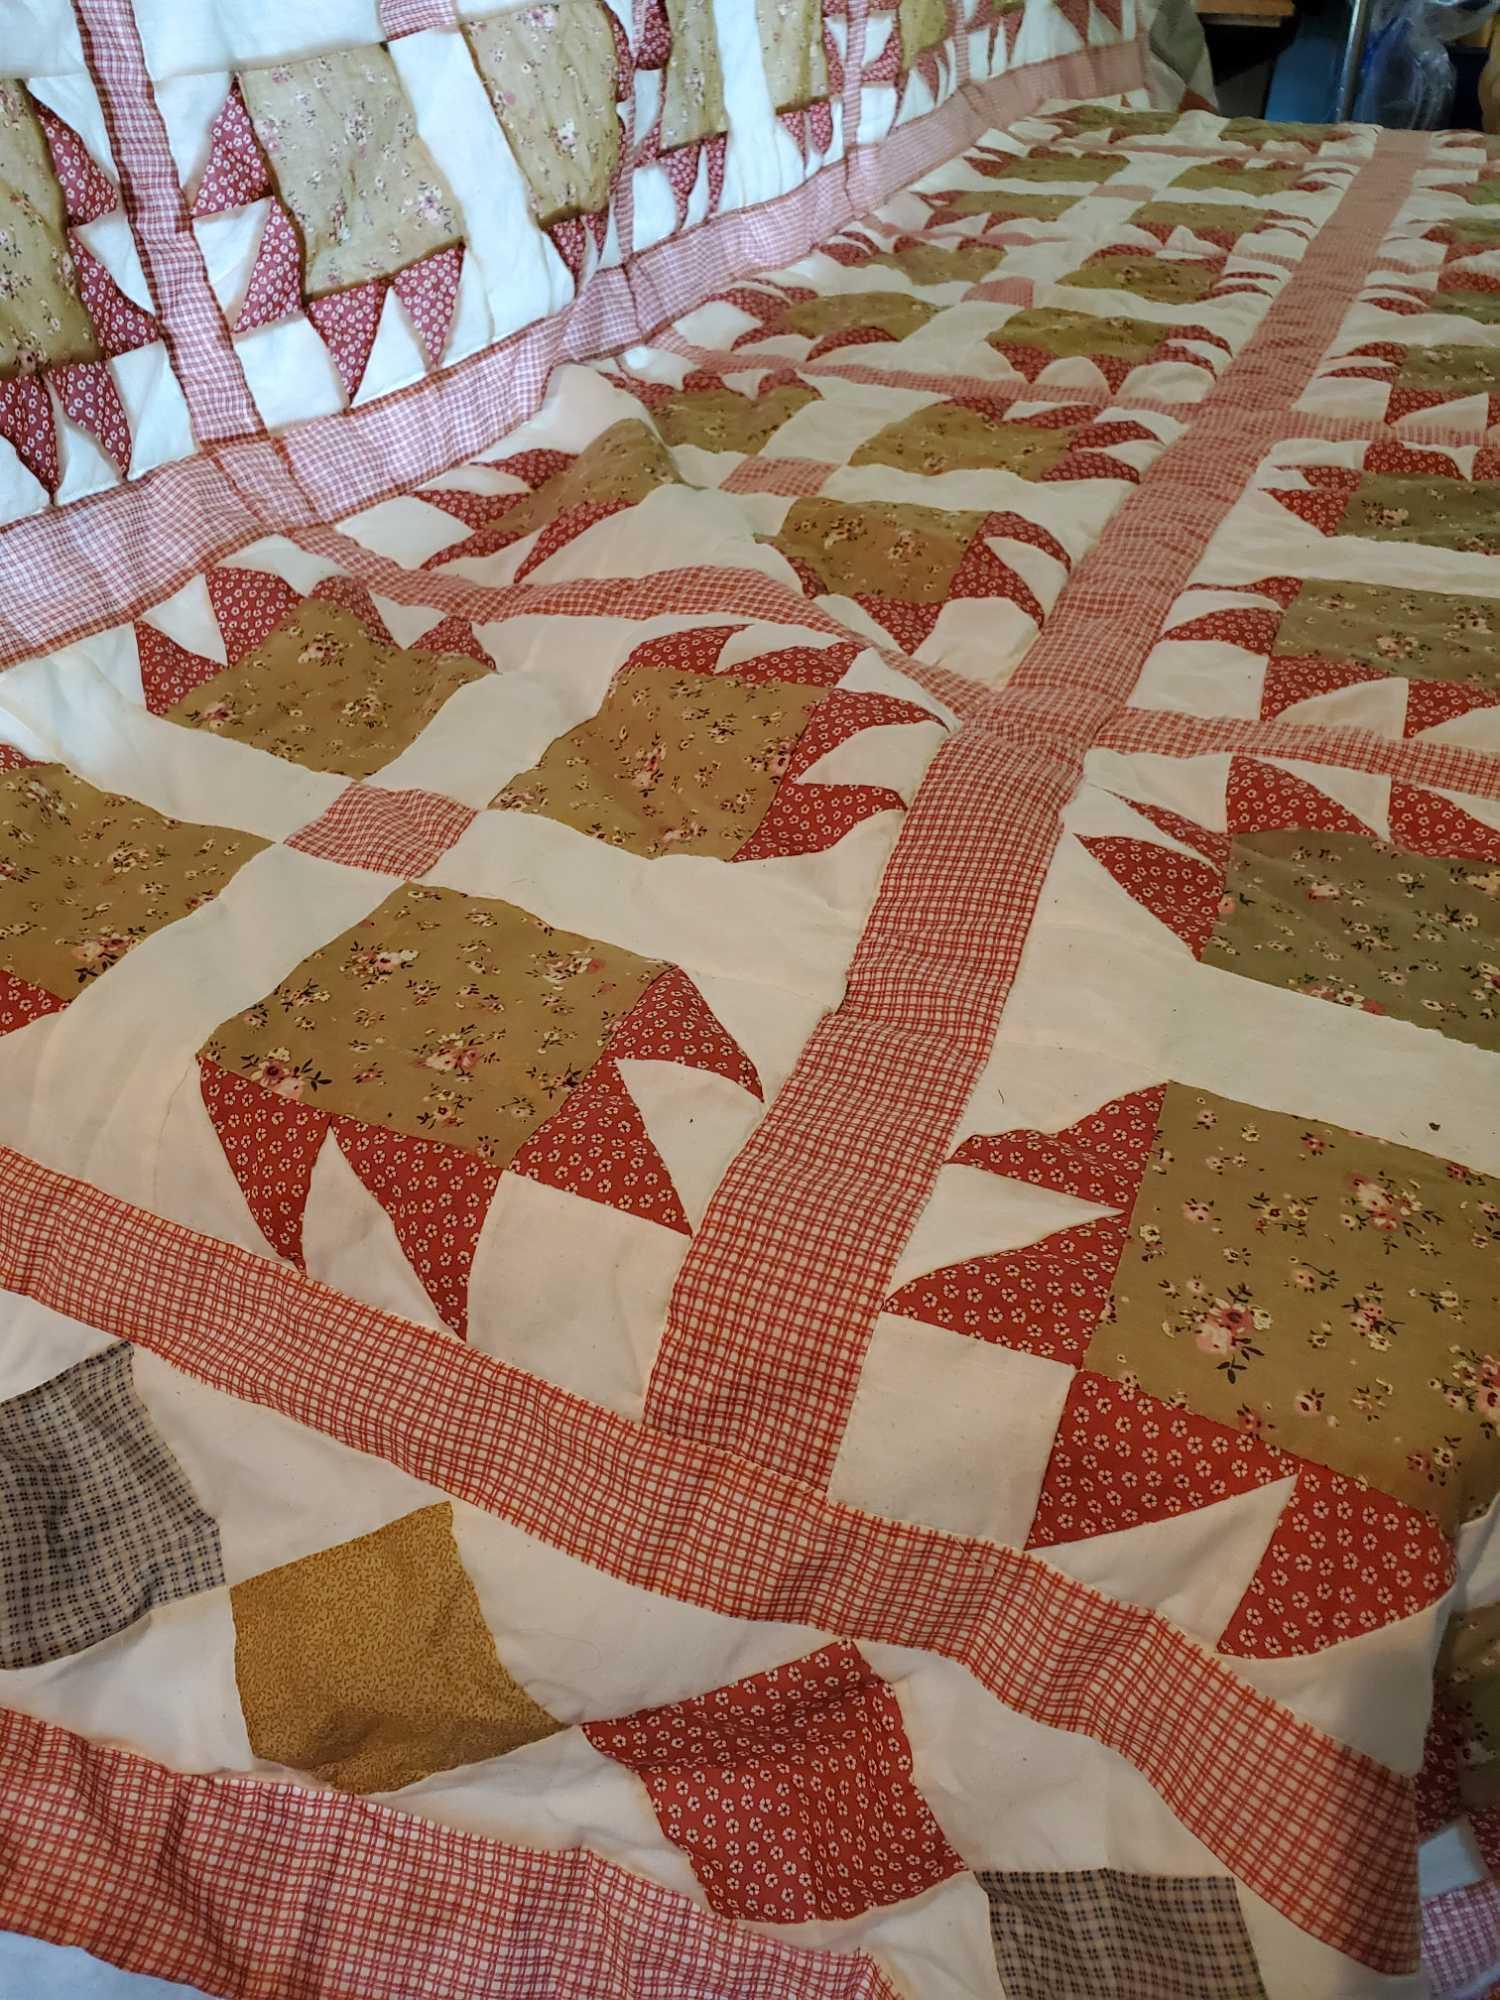 King size patchwork quilt style comforter, rust, greens, yellows